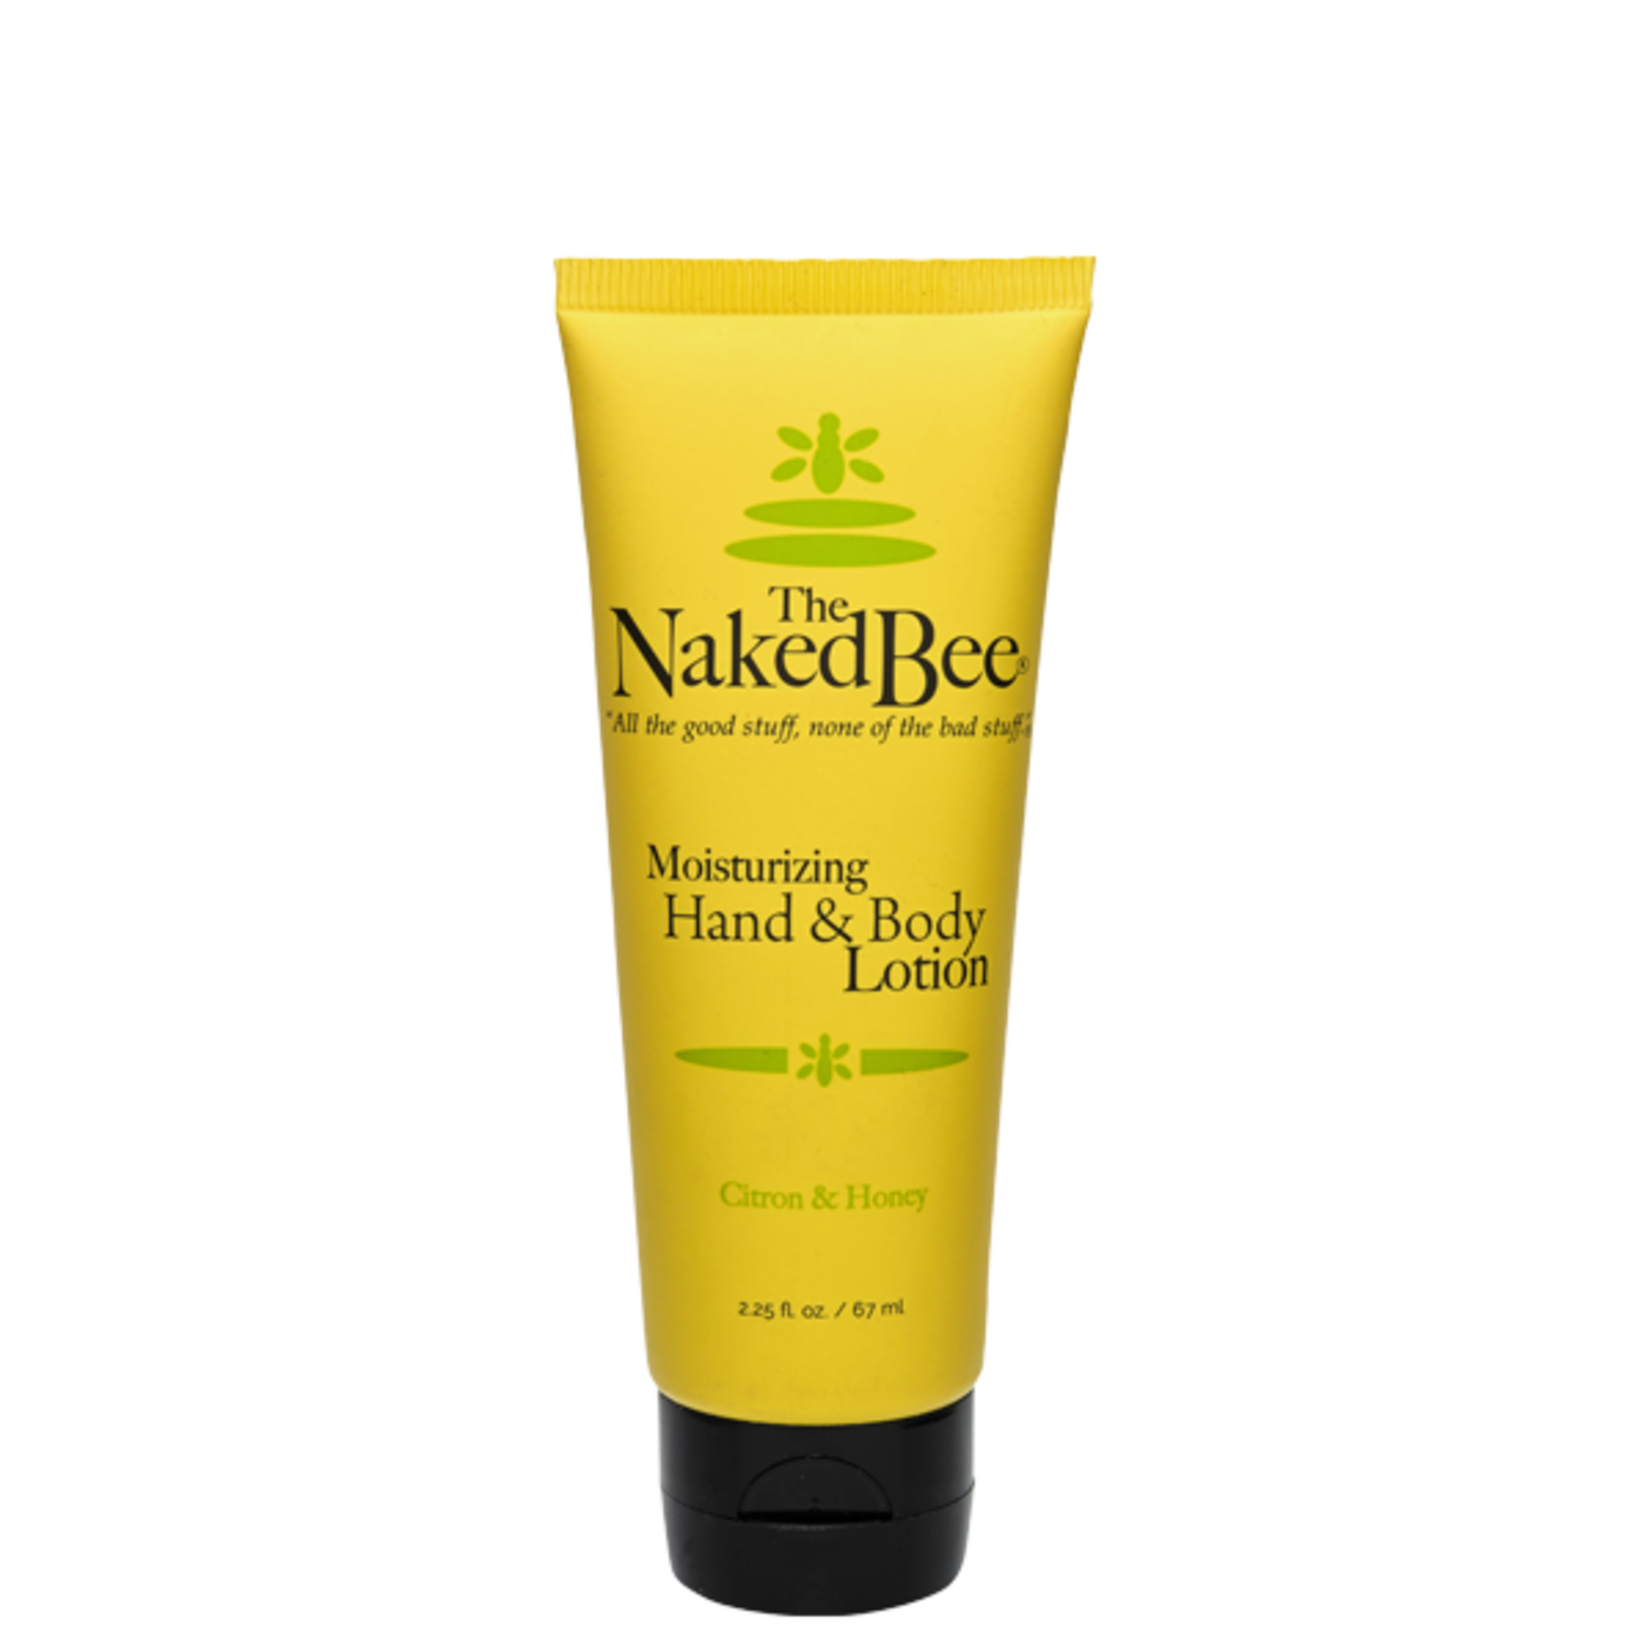 The Naked Bee The Naked Bee Moisturizing Hand & Body Lotion 2.25 oz